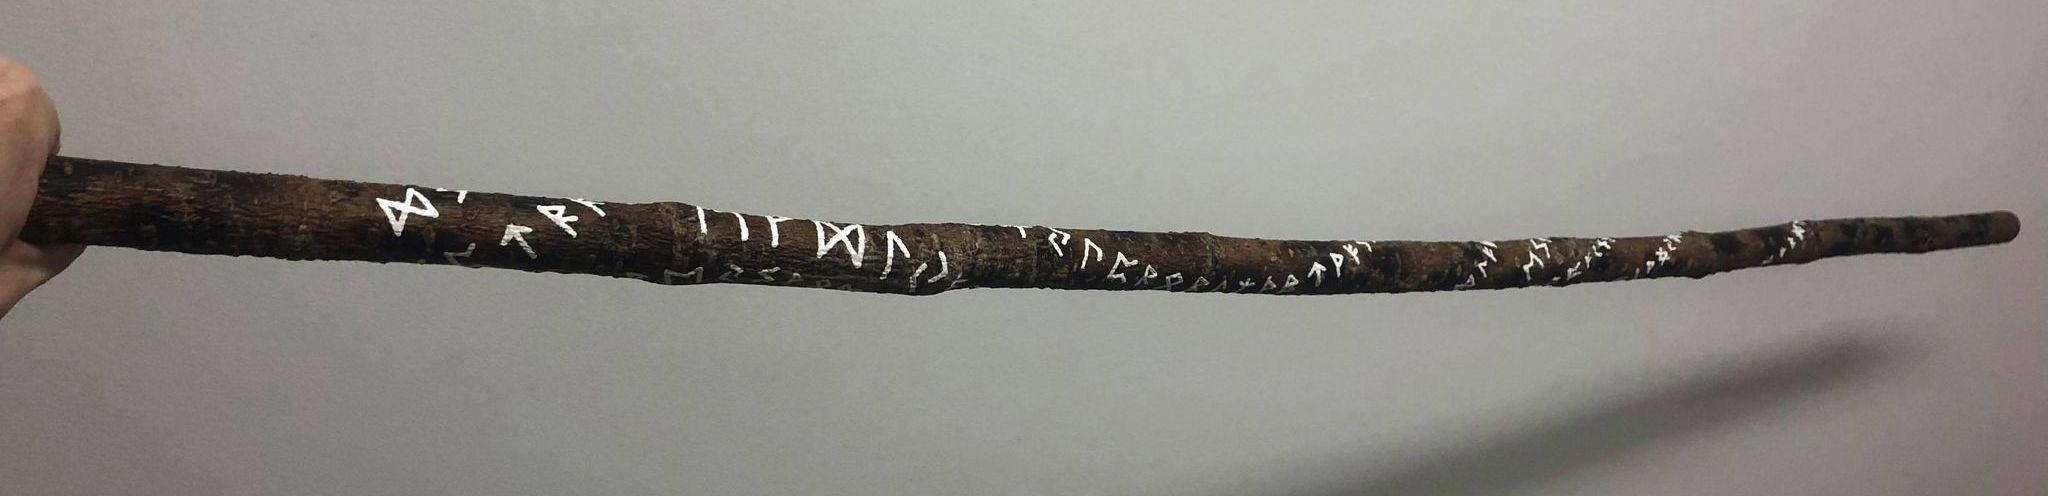 A wooden staff containing hundreds of runes.